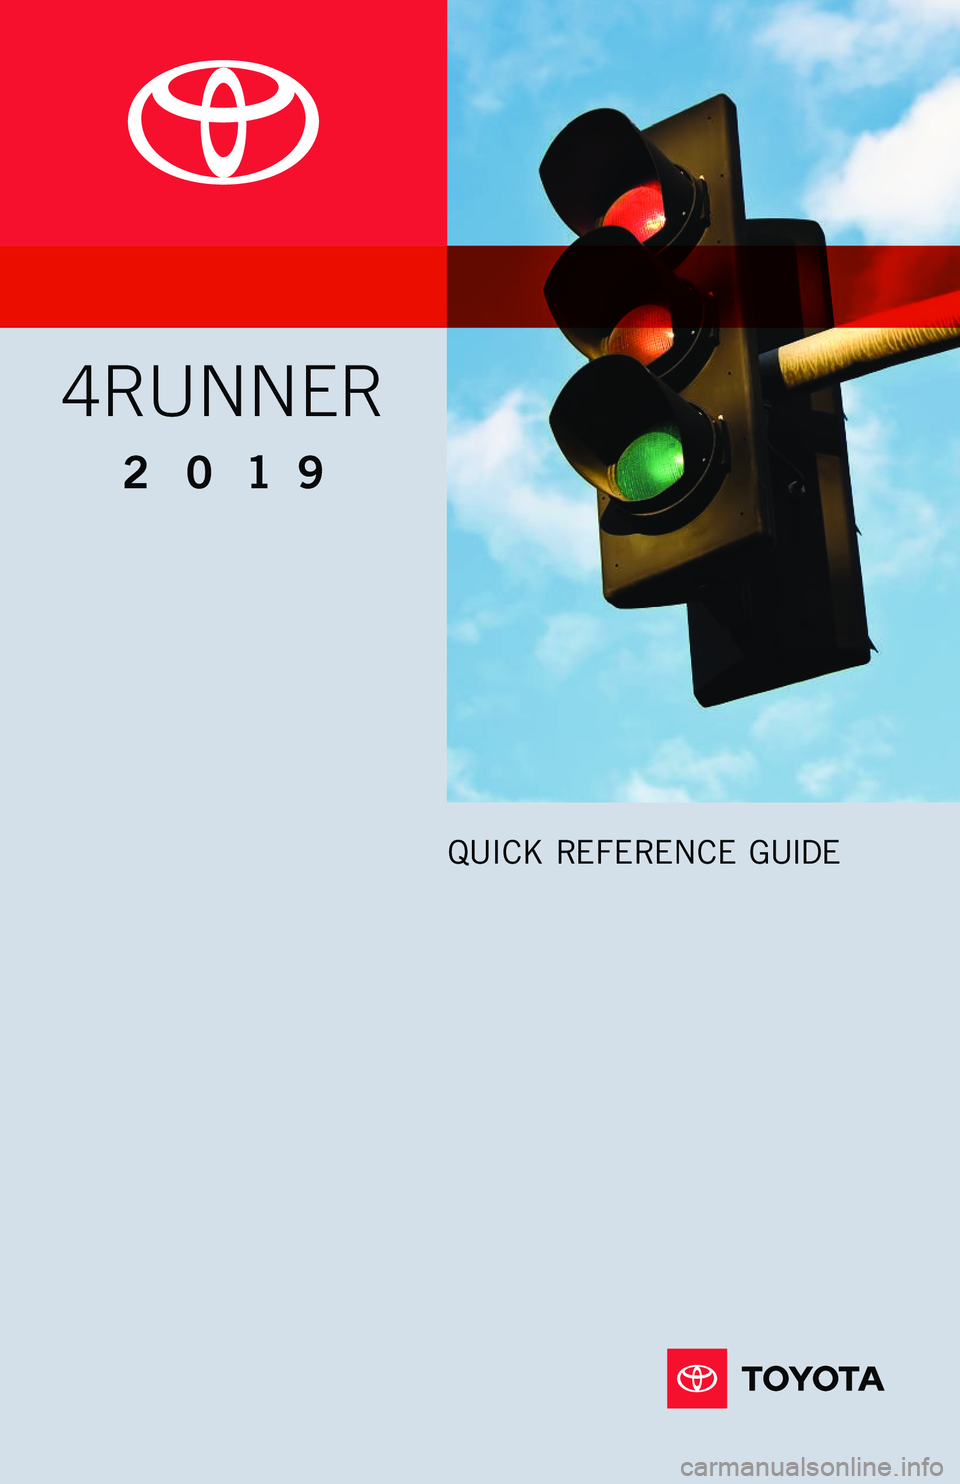 TOYOTA 4RUNNER 2019  Owners Manual (in English) 2019
QUICK REFERENCE GUIDE
4RUNNER
114558_18-MKG-12045 - MY19 Toyota 4Runner QRG_1_TG_R1.indd   27/13/18   10:17 PM   